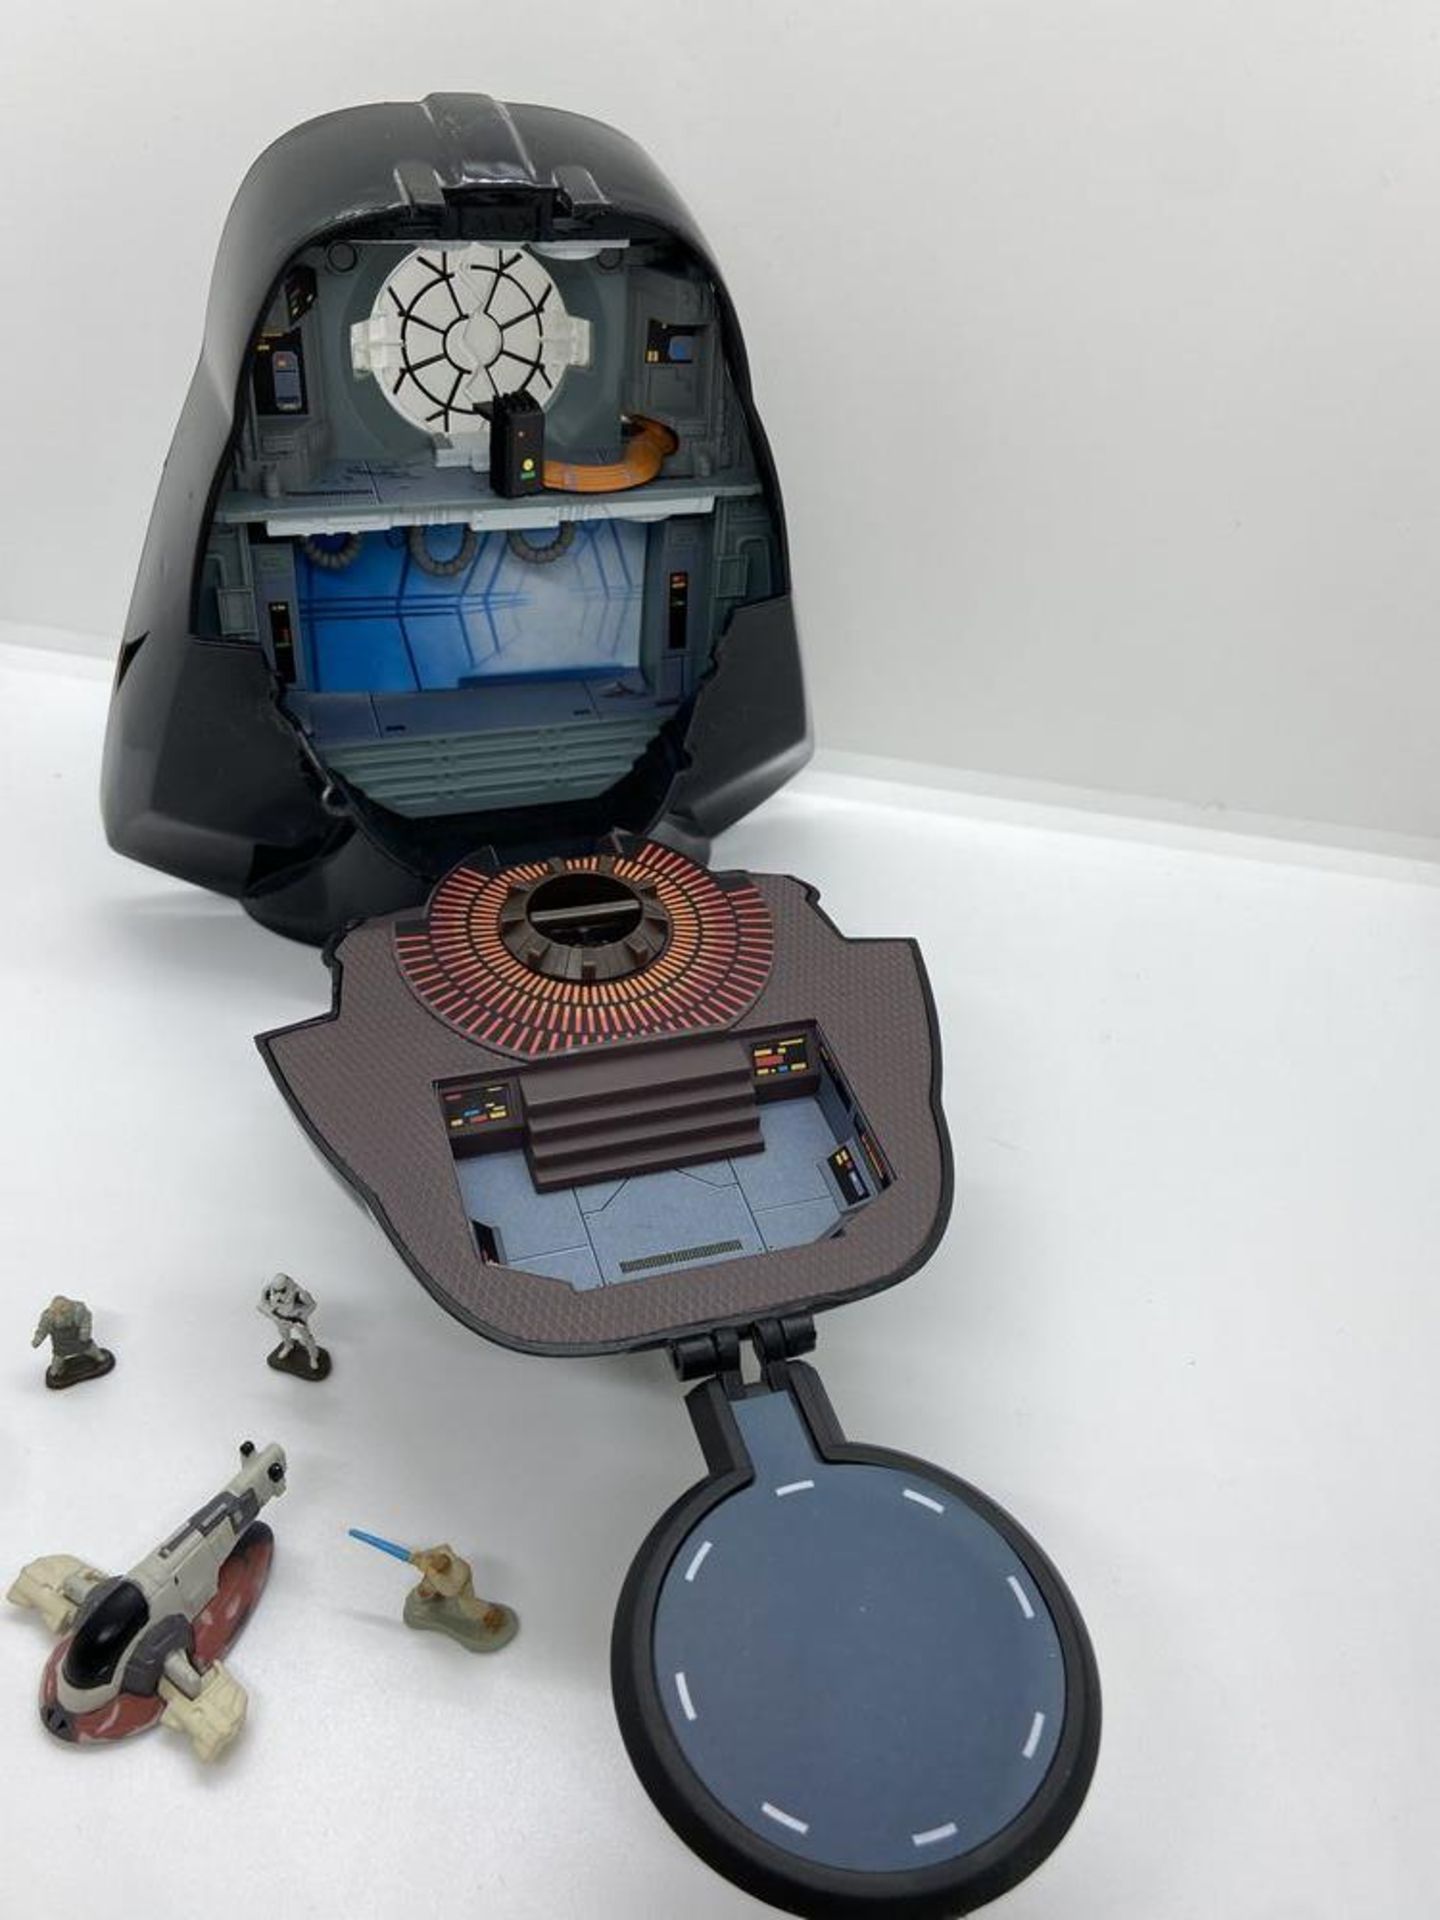 Star Wars Darth Vader MicroMachines Toy Playset dating back to the 1990s - Image 5 of 8